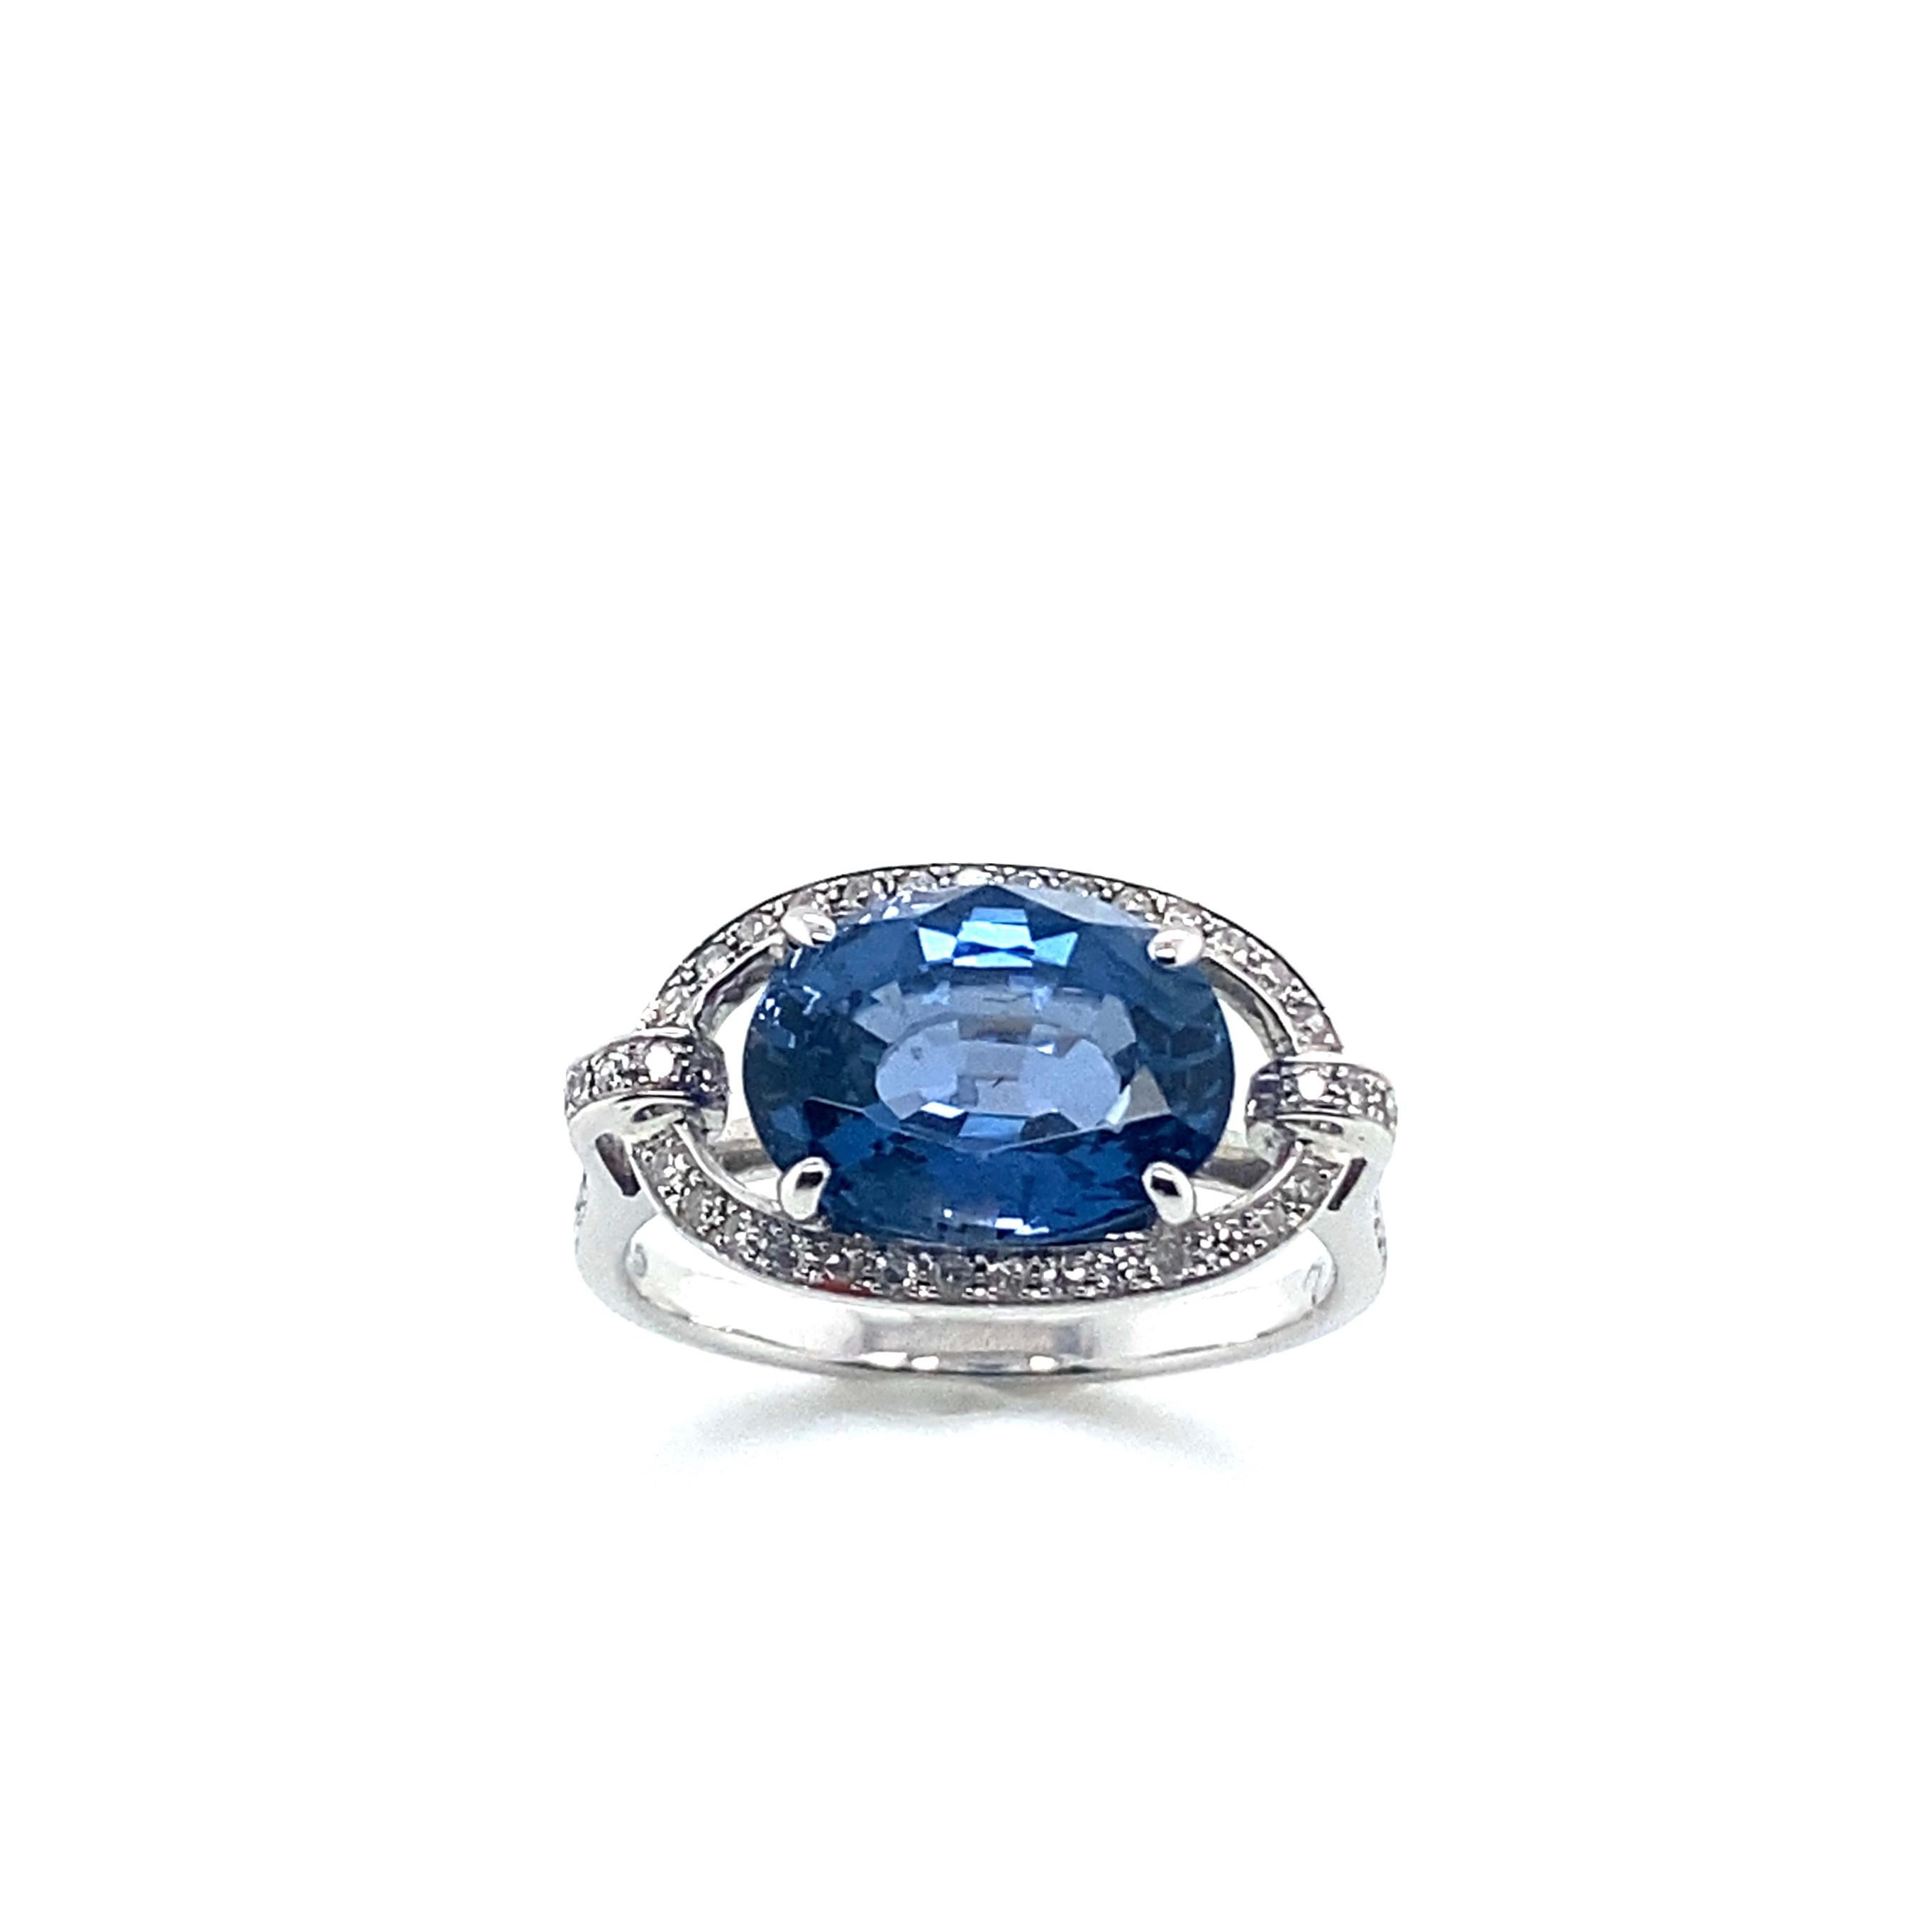 18 Karat White Gold Ring Topped with a Blue Spinel Surrounded by Diamonds.
White Gold Ring topped with a Oval blue spinel which weight 3.1 carats, color Blue.
The ring is surrounded by brillants diamonds which weight 0.20 carats, color G
Weight: